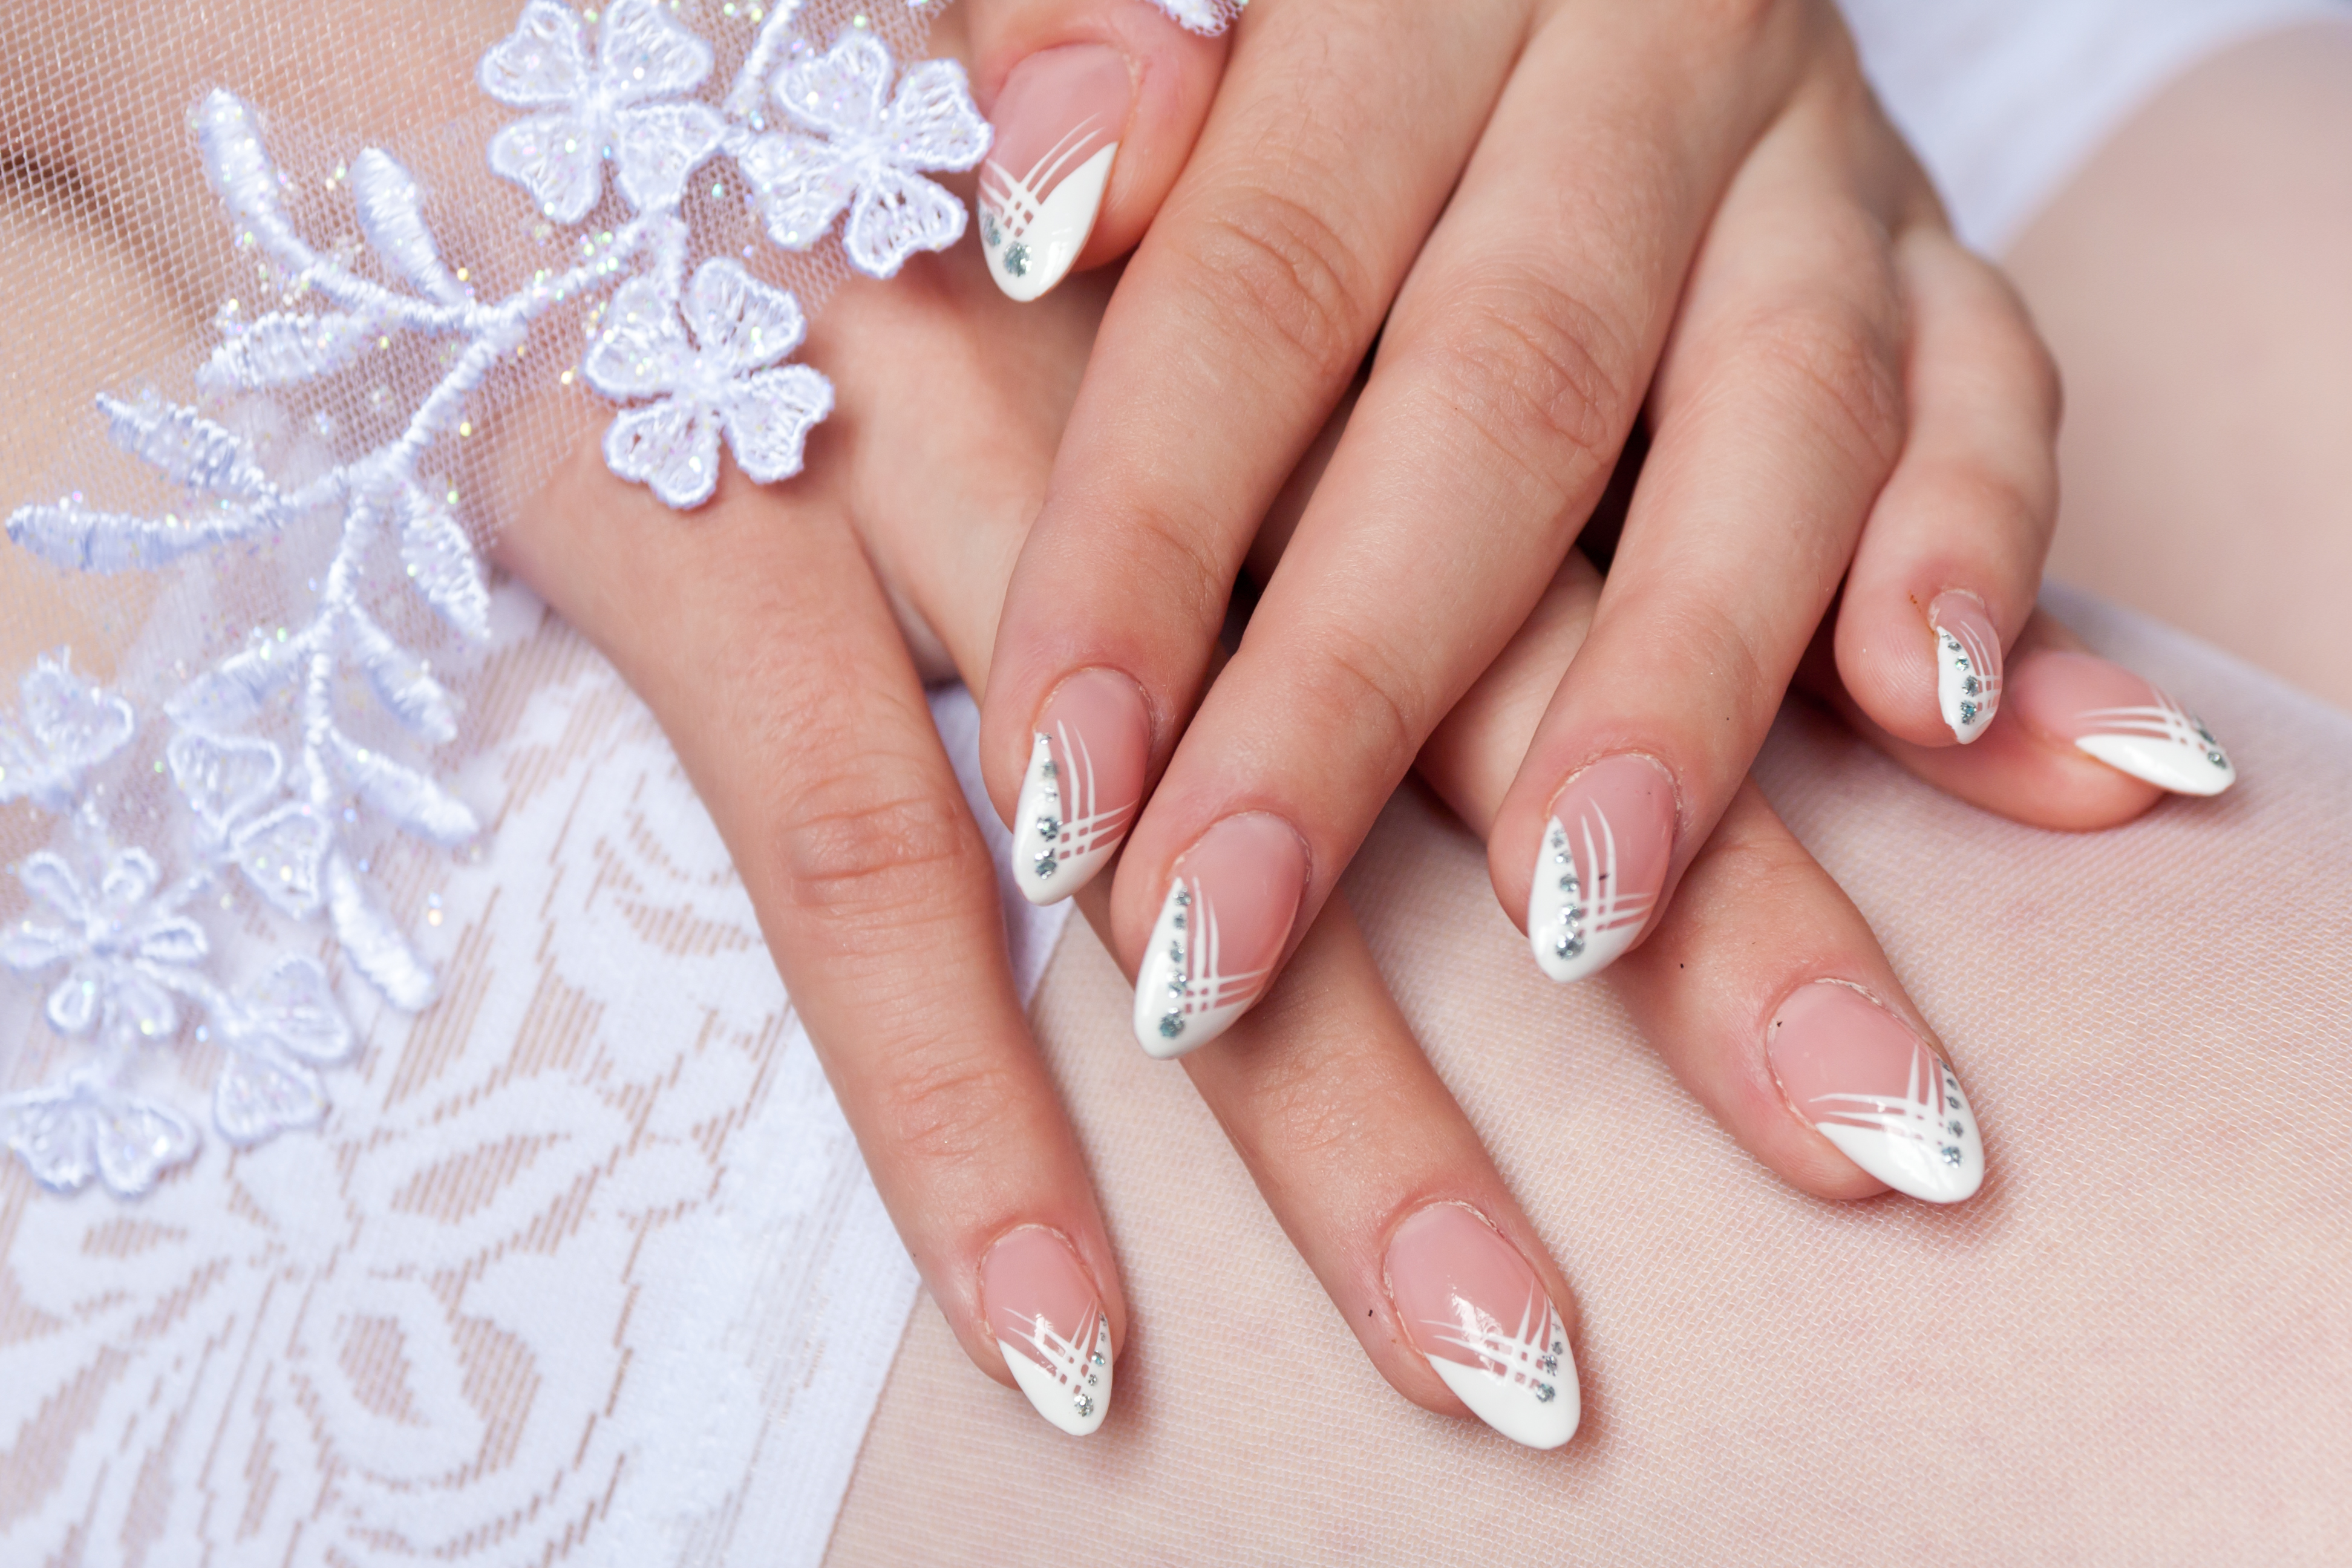 Bride's manicure on lace stockings